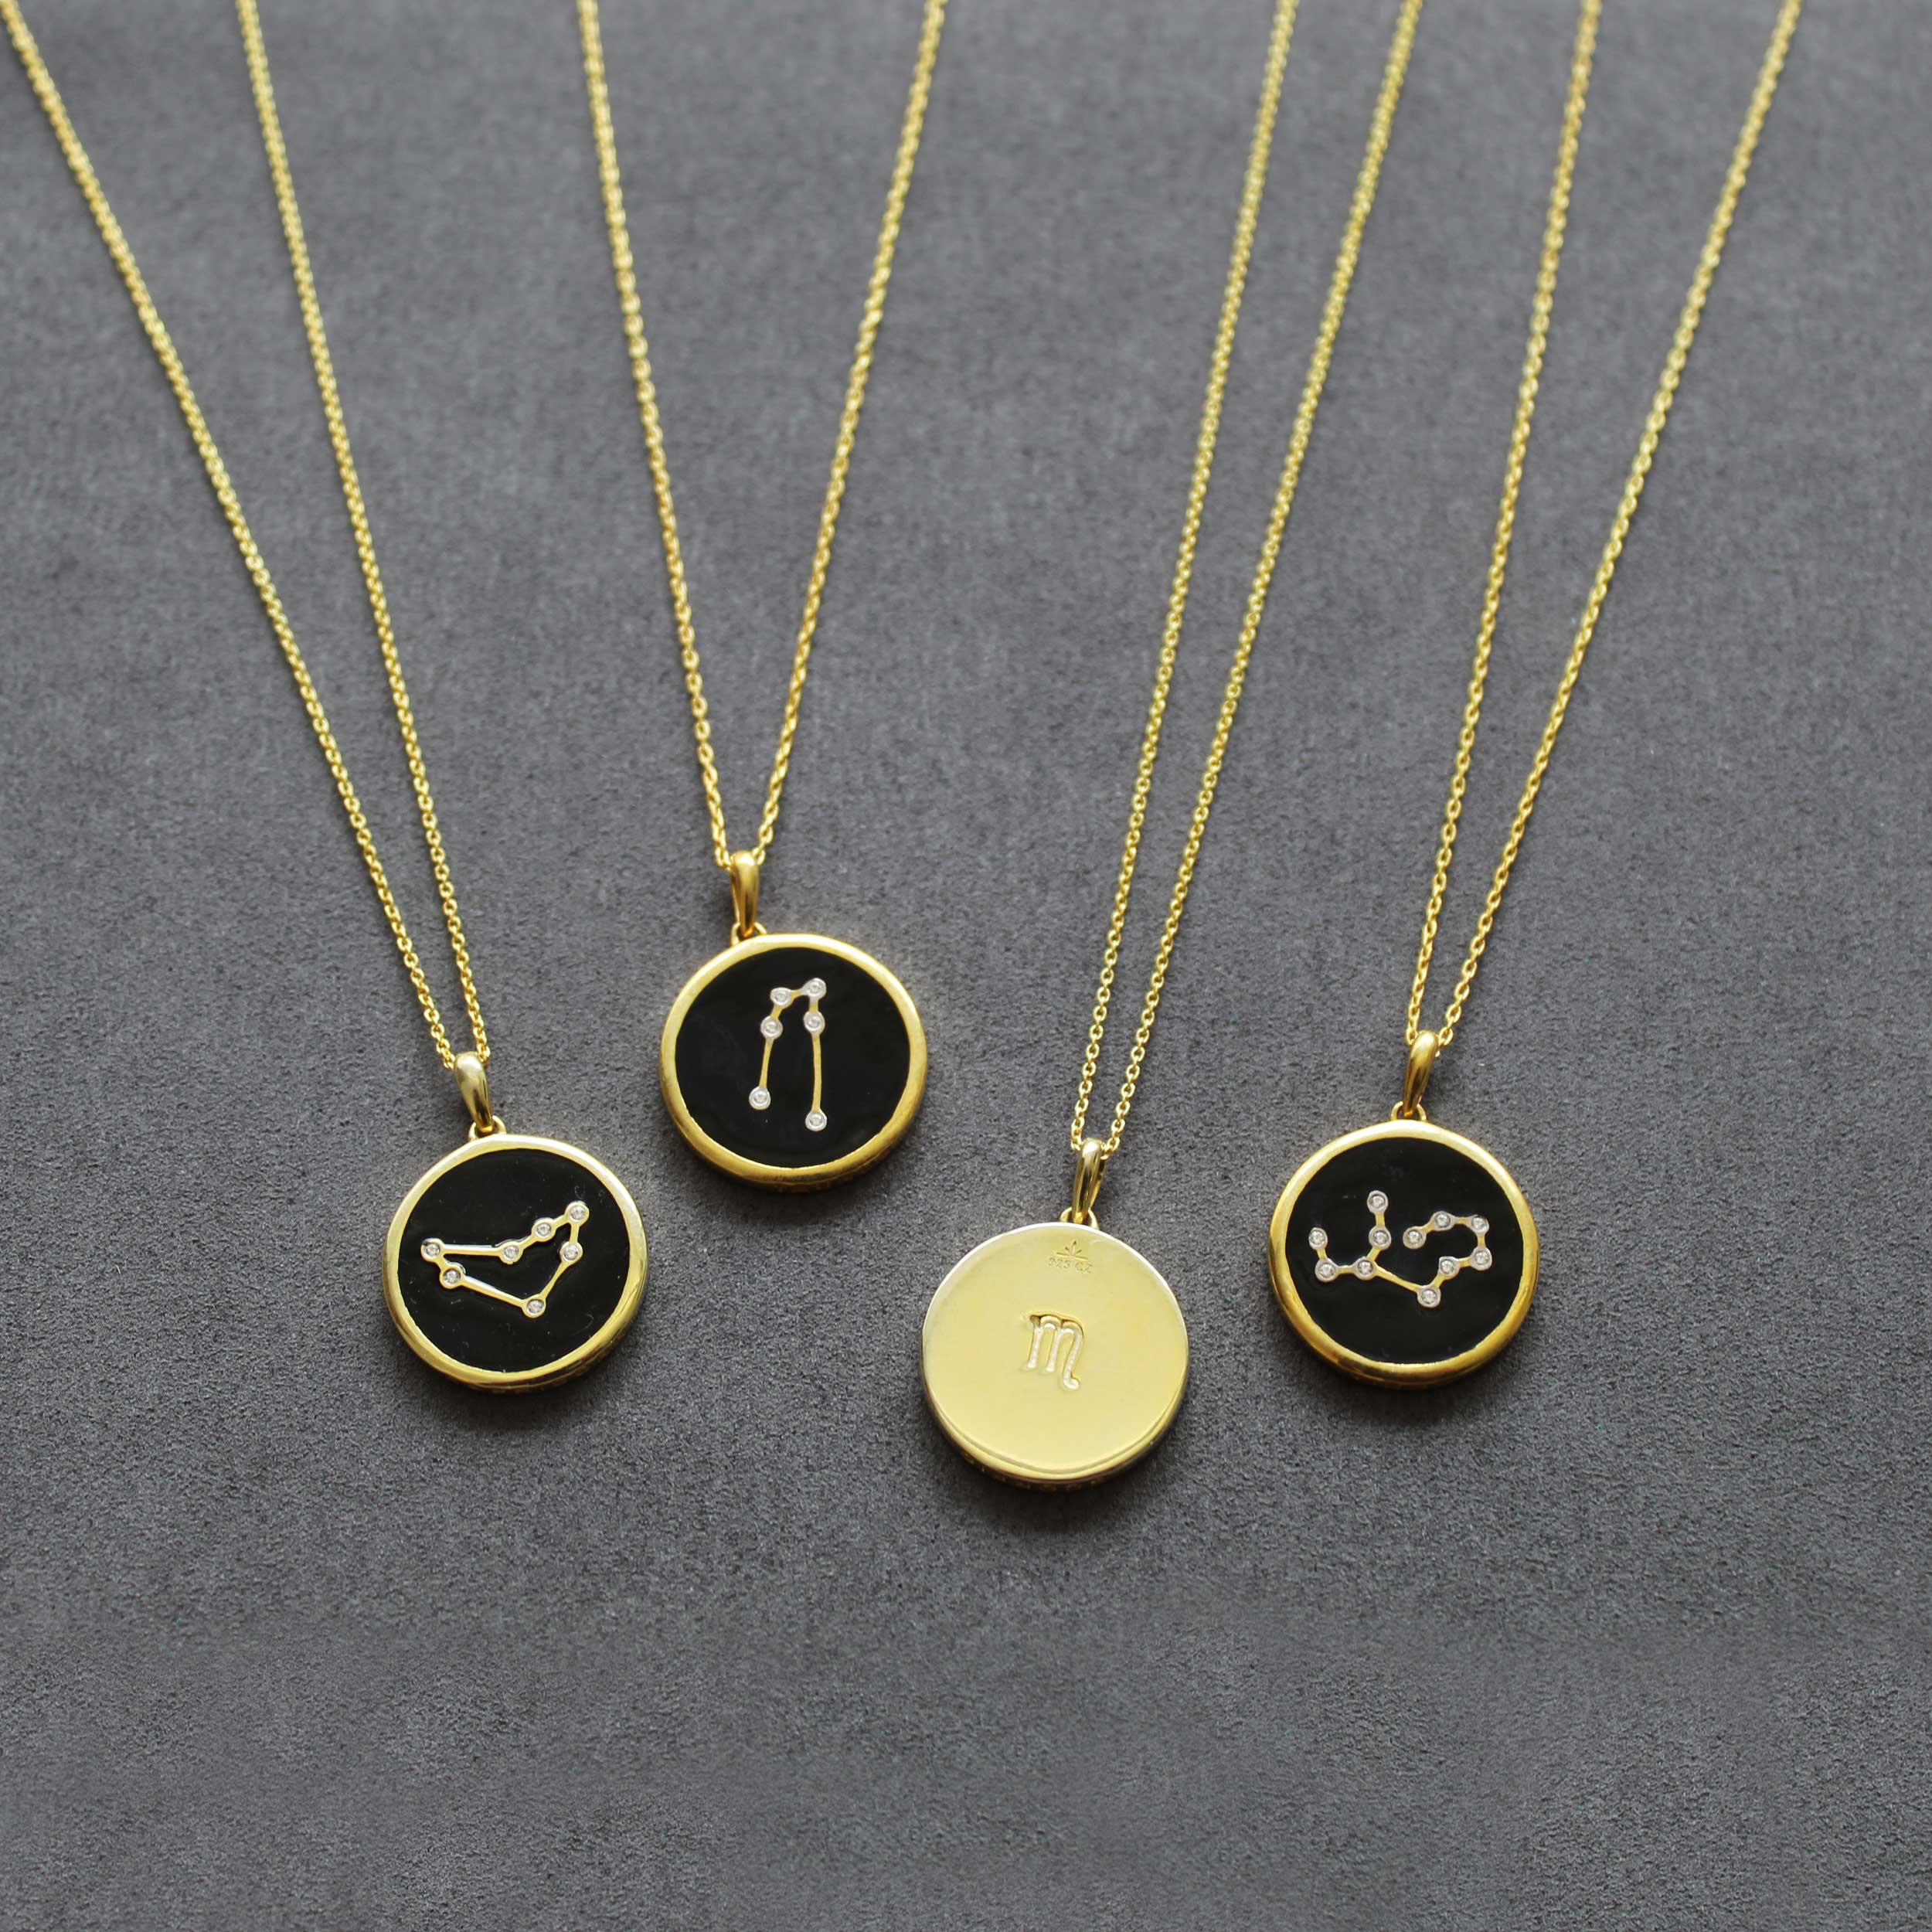 Zodiac Star Sign Necklace for Women Jewelry Celestial Constellation Wedding  Bridesmaid Proposal Best Birthday Flower Girl Gift for Her - Etsy |  Constellation jewelry, Zodiac constellation necklace, Constellation necklace